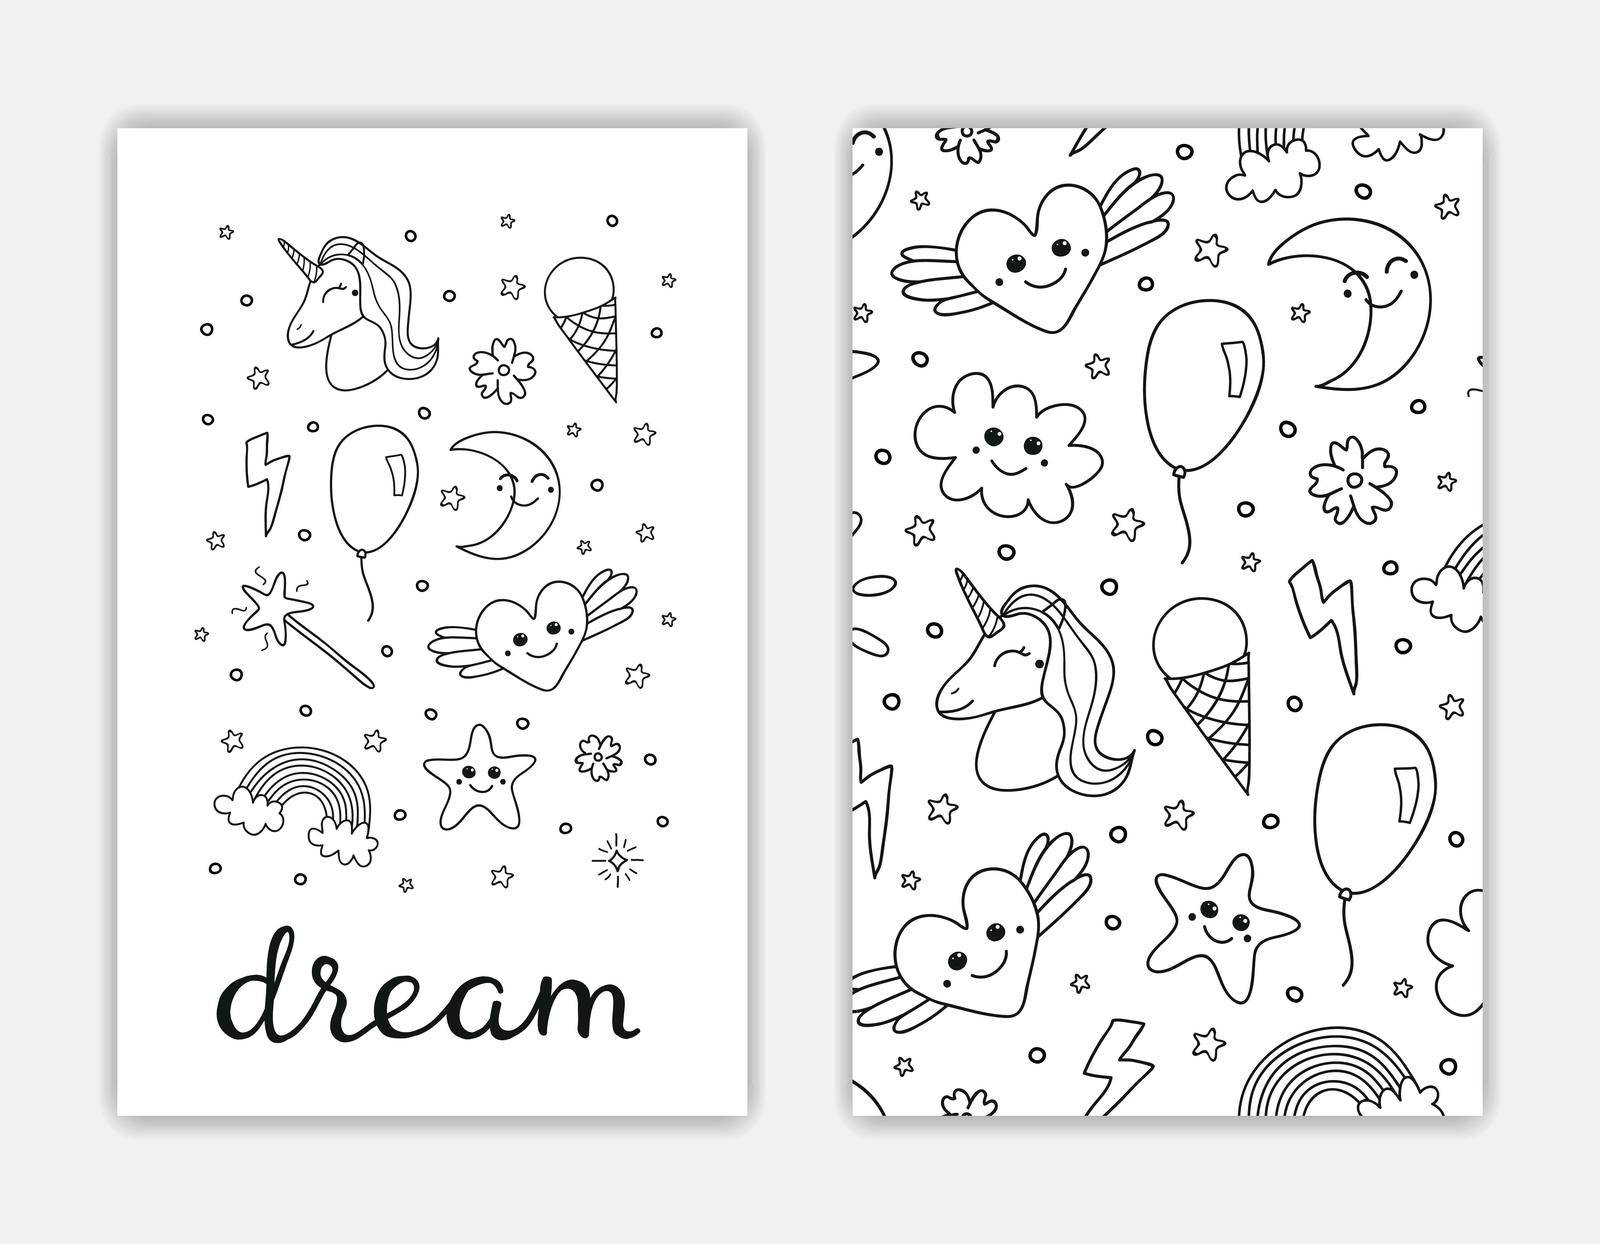 Card templates with hand drawn cute items. by Minur